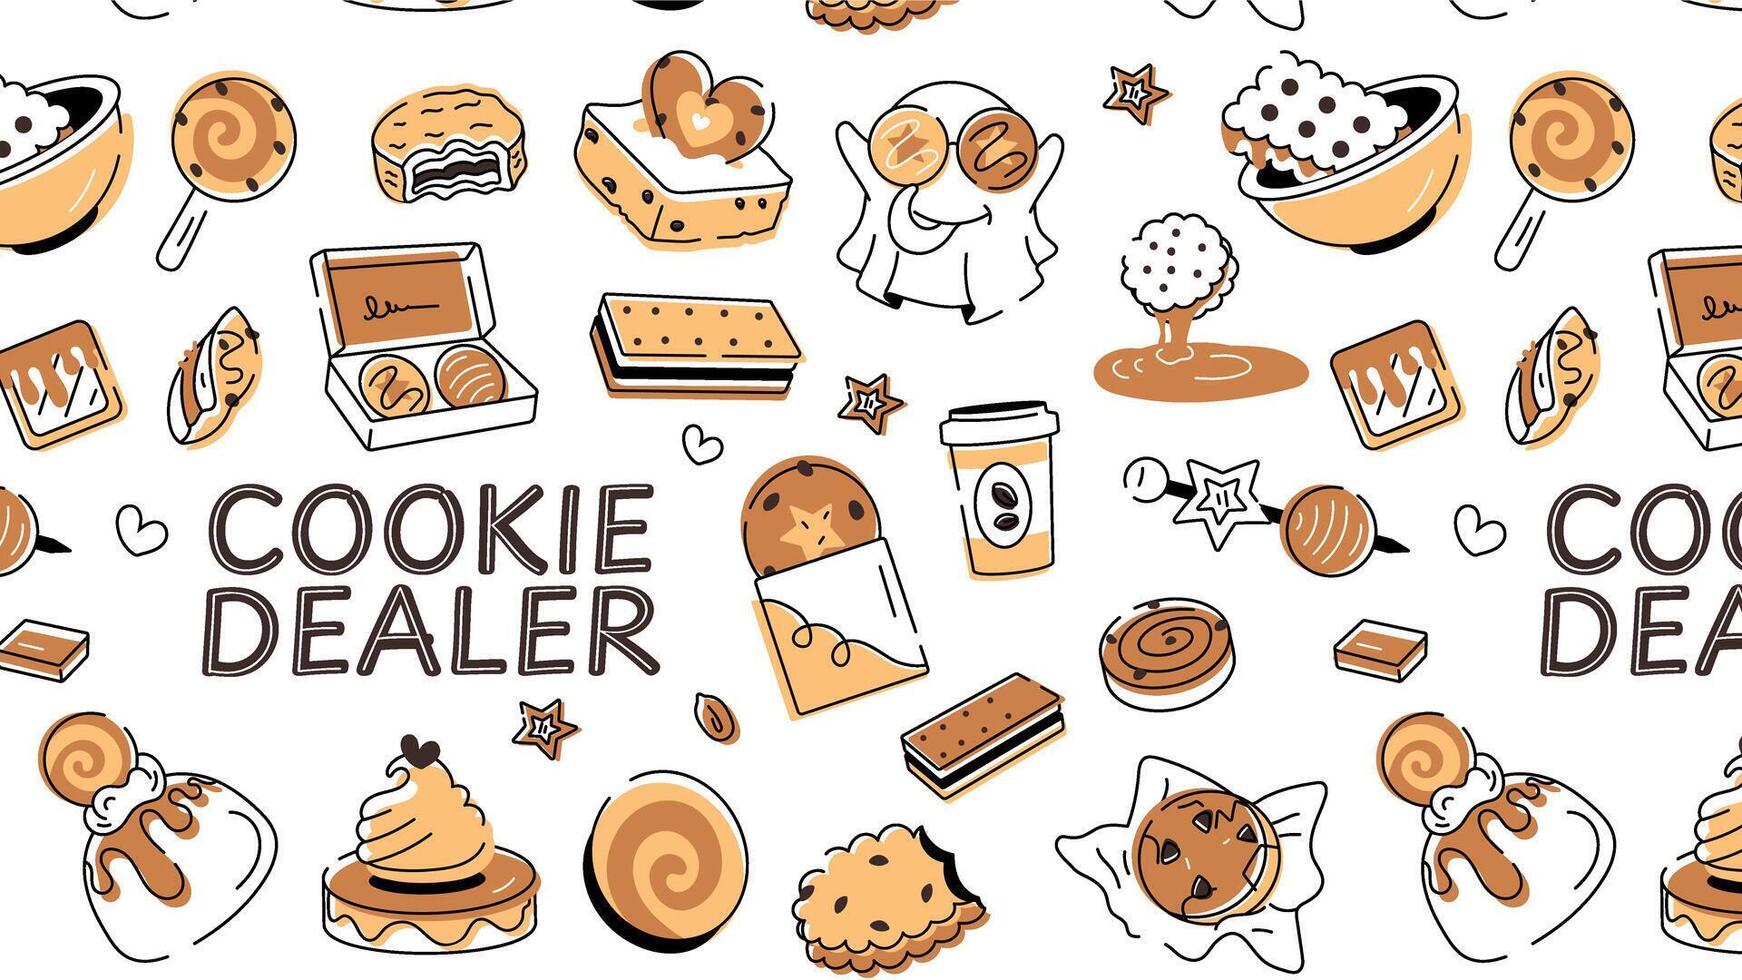 Doodle style cookie pattern depicting various types of bakery food and confectionery items vector